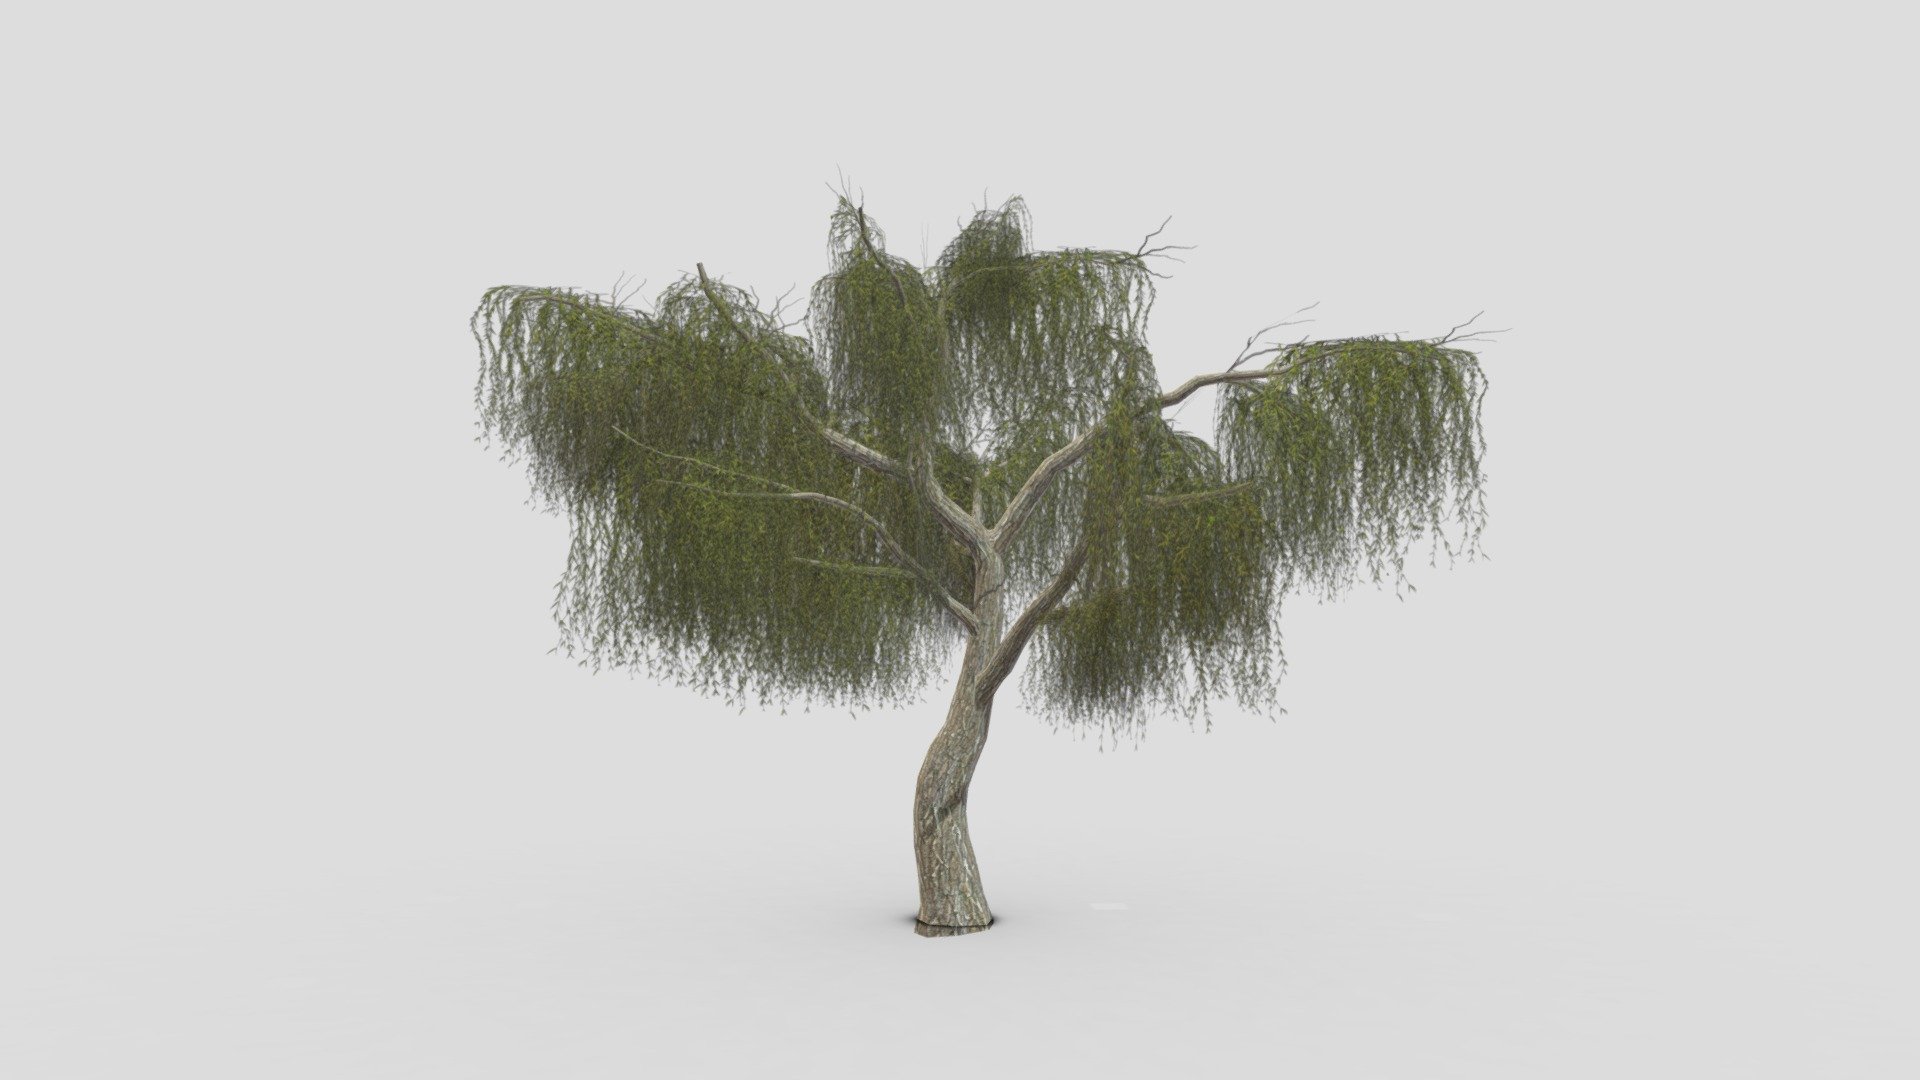 I try to provide low poly model of Weeping Willow tree to use for your game project. I hope this model will be useful for you 3d model